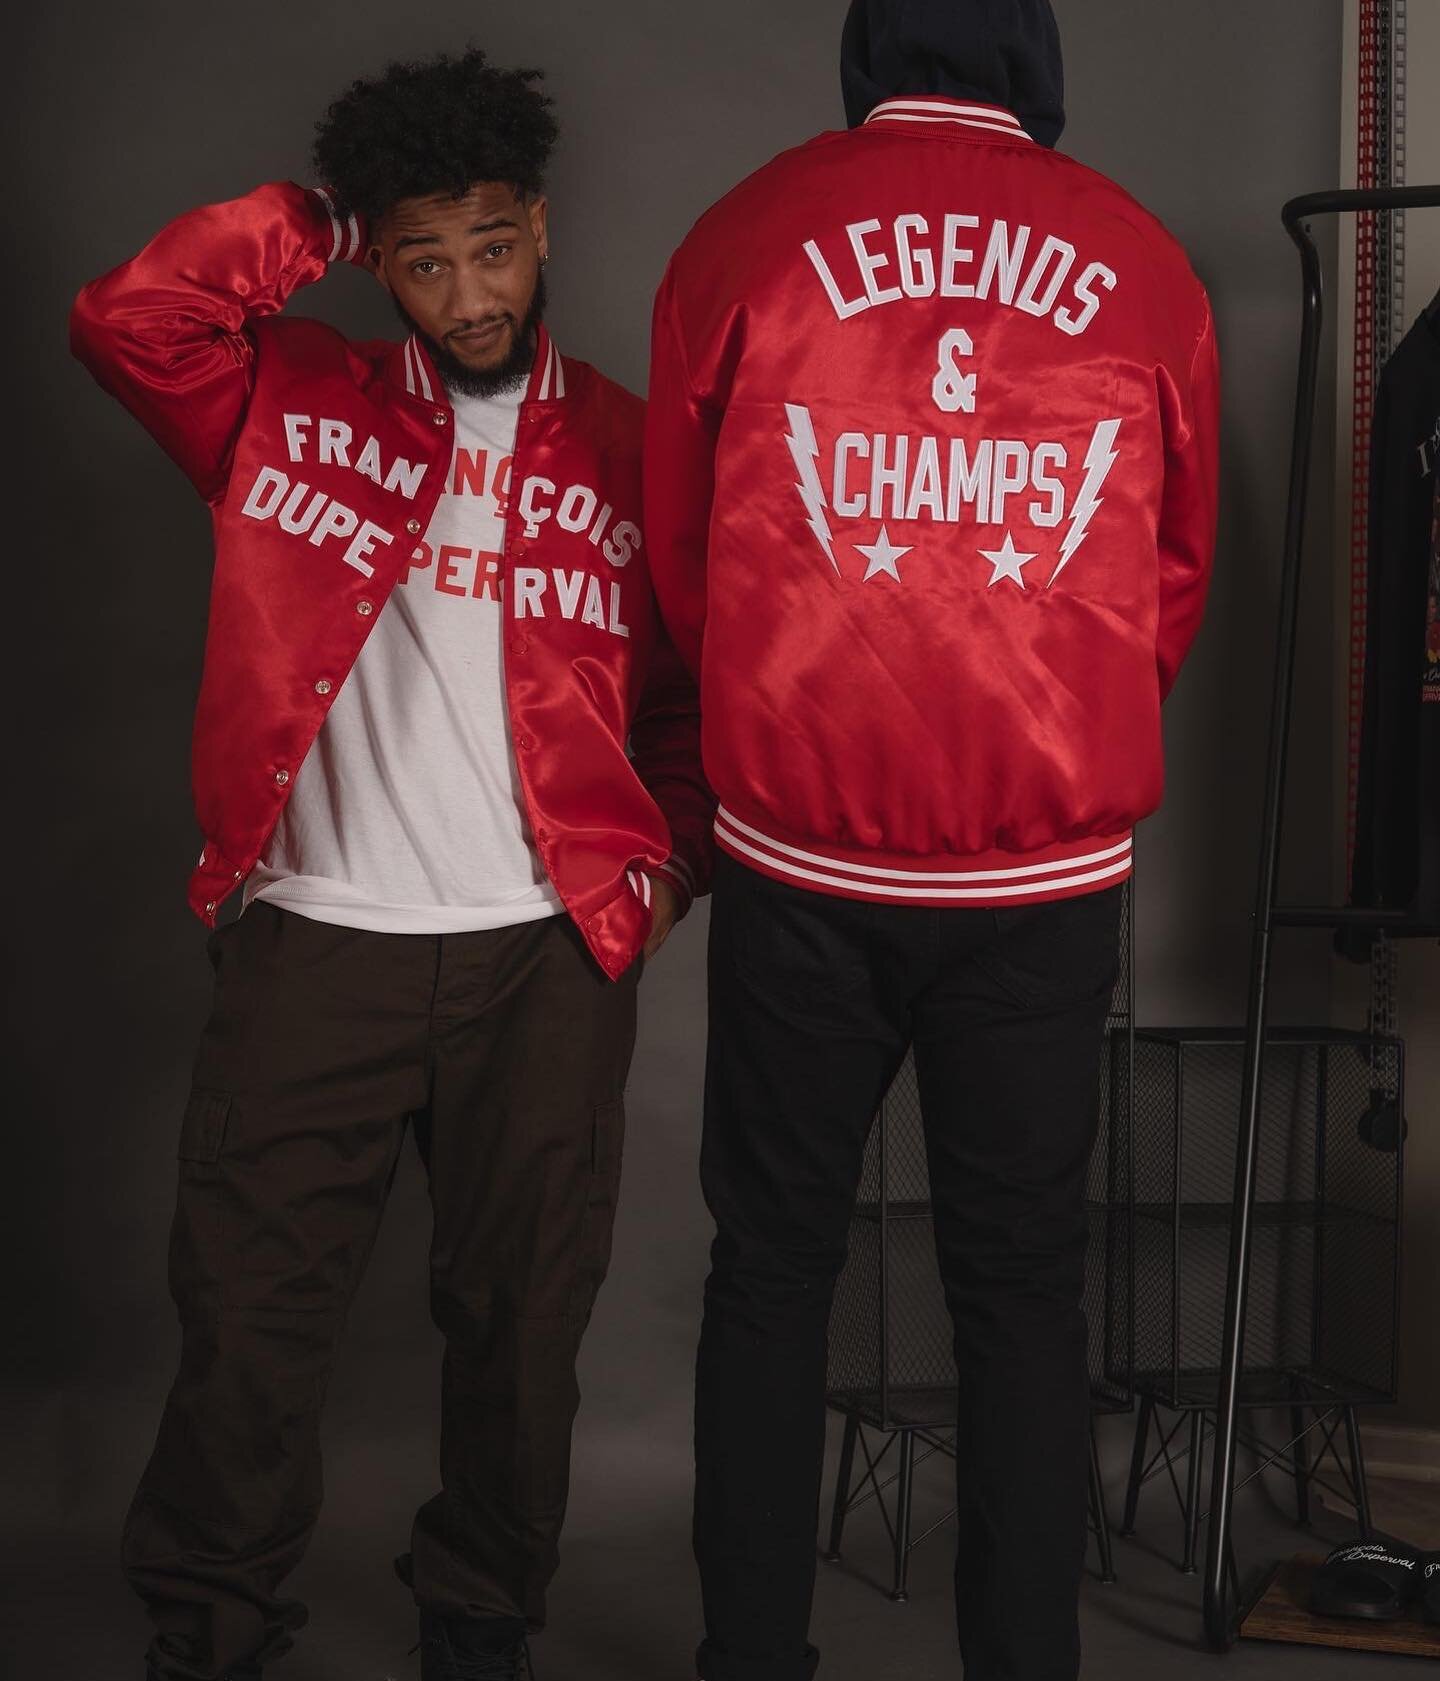 A Champion is one who has overcome the obstacles on his path to success. 

Legends &amp; Champs Satin Jacket is available for purchase NOW! Head over to the site (link in bio) or click the picture for immediate purchase! Dont&rsquo; forget you can BU